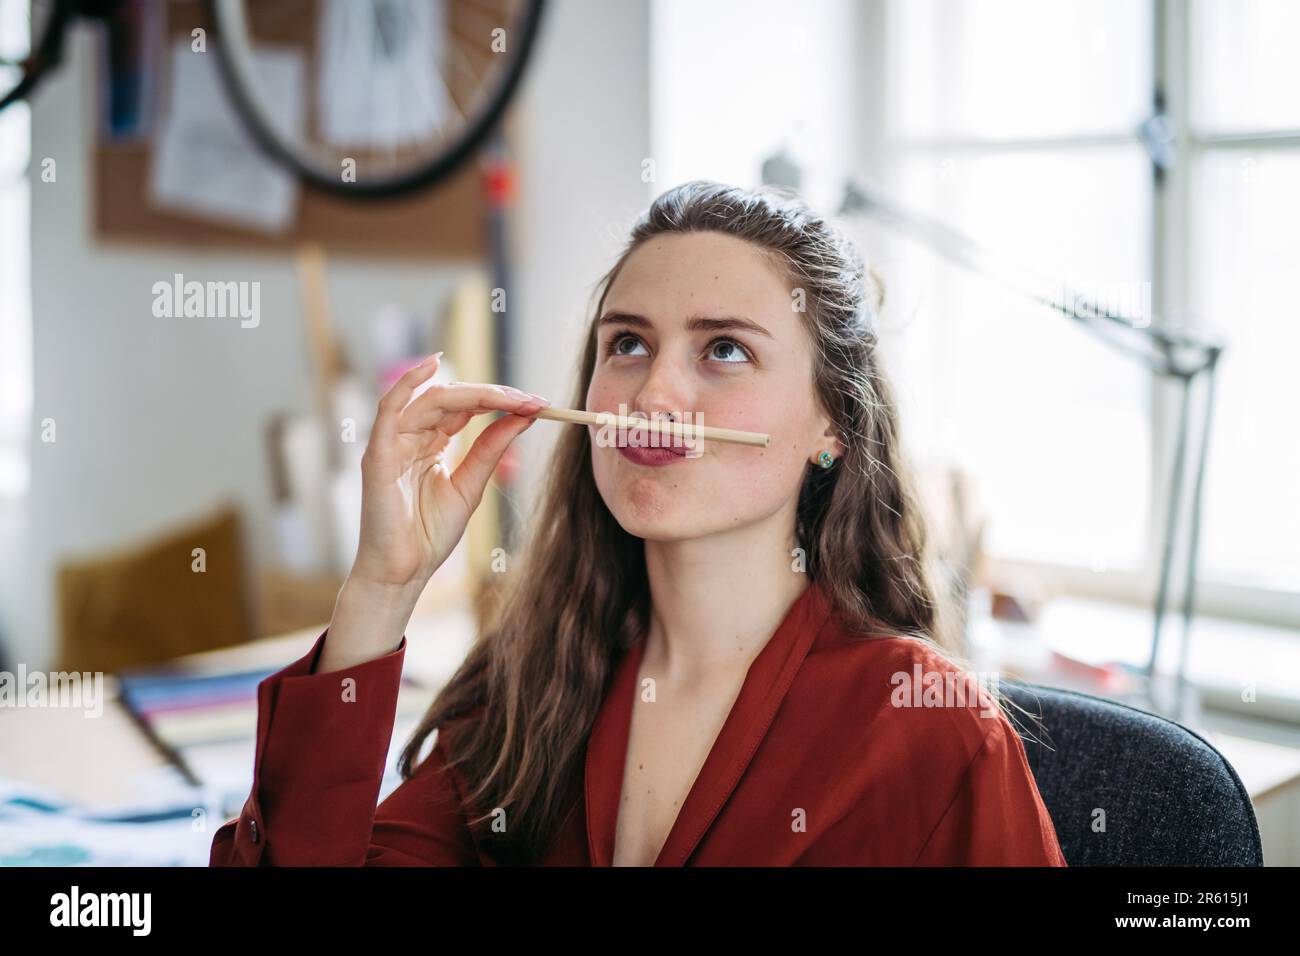 Portrait of funny woman with pencil in mouth, having fun at work. Stock Photo